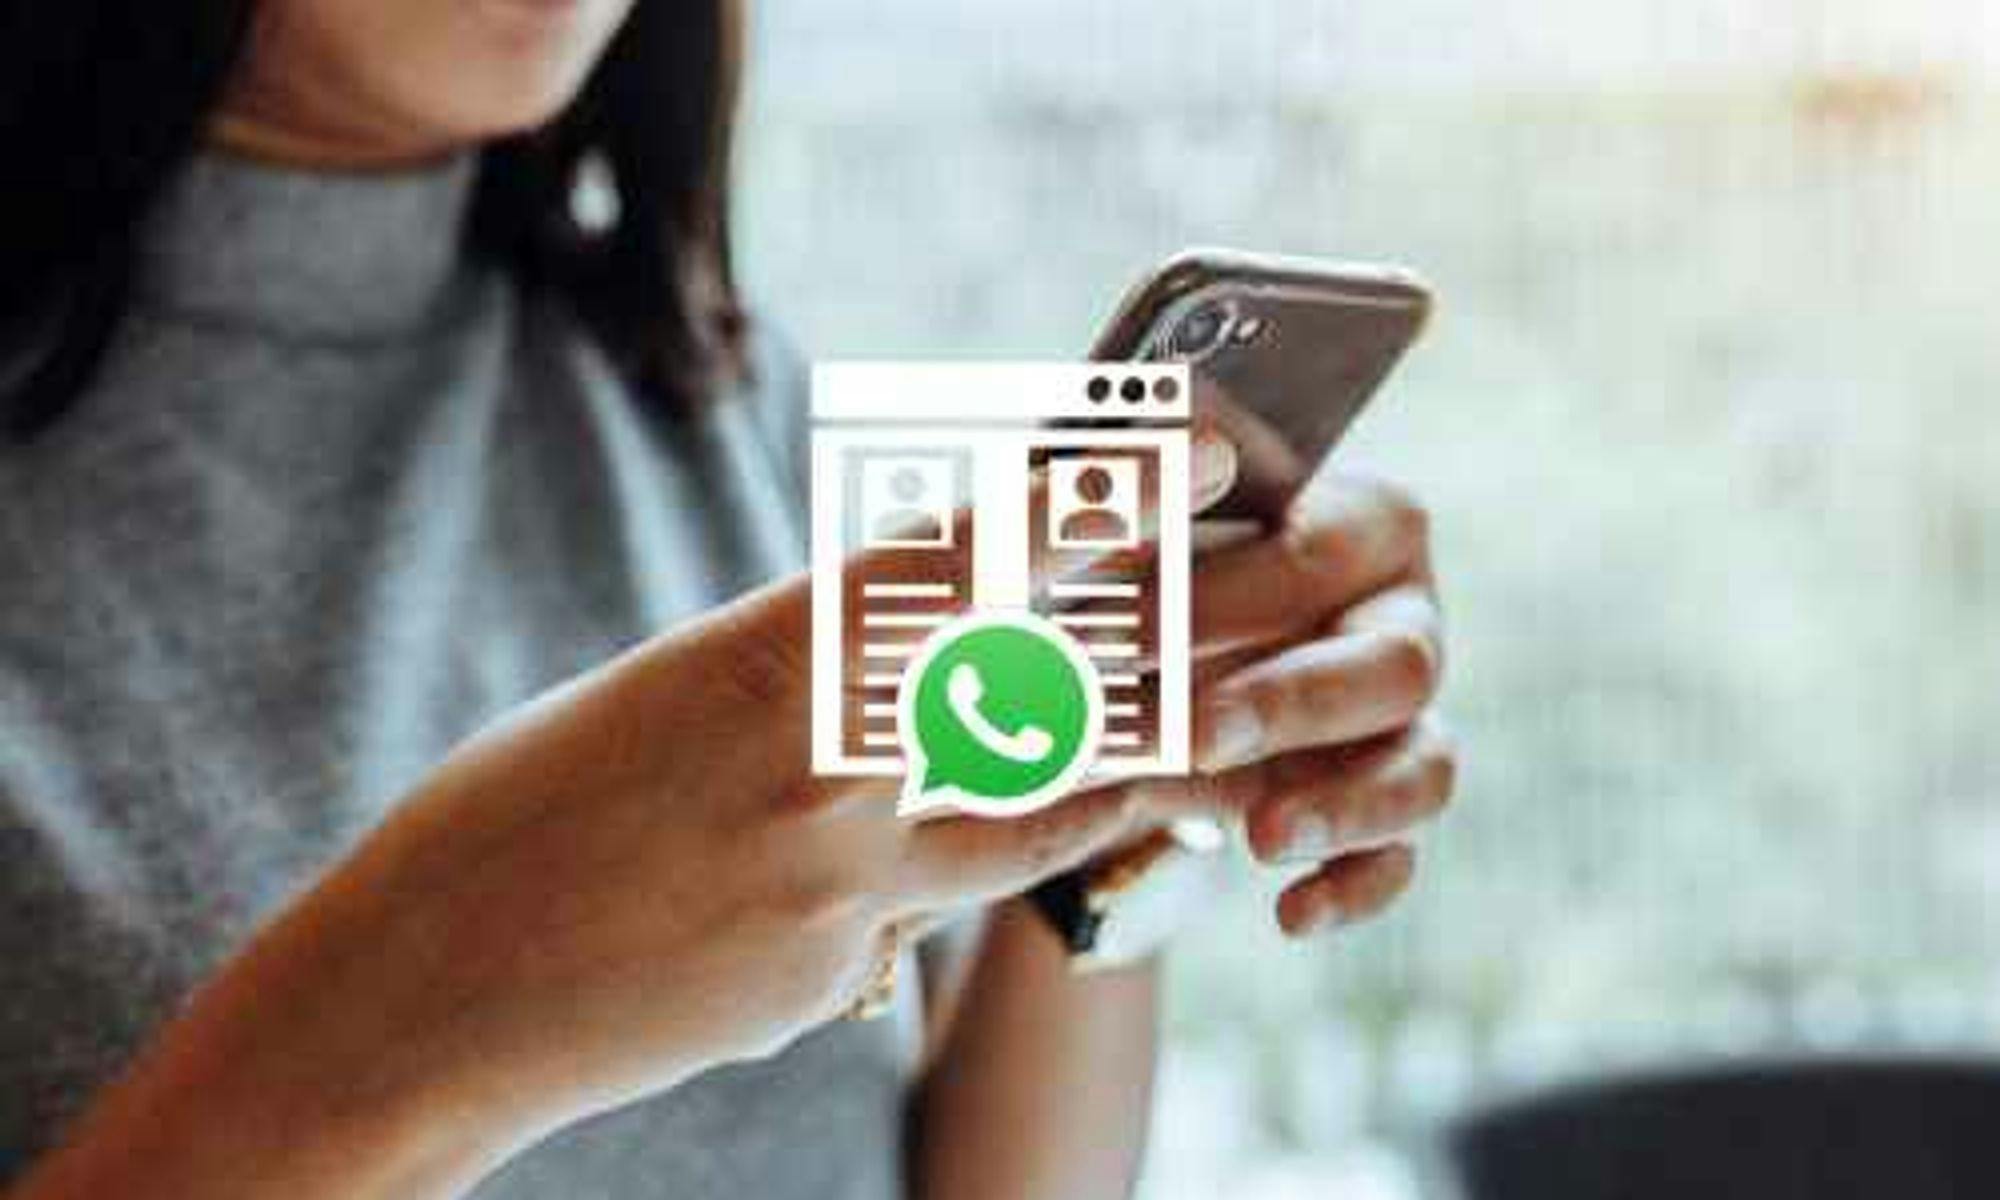 Multiple Whatsapp Accounts Are Coming To The Same Phone